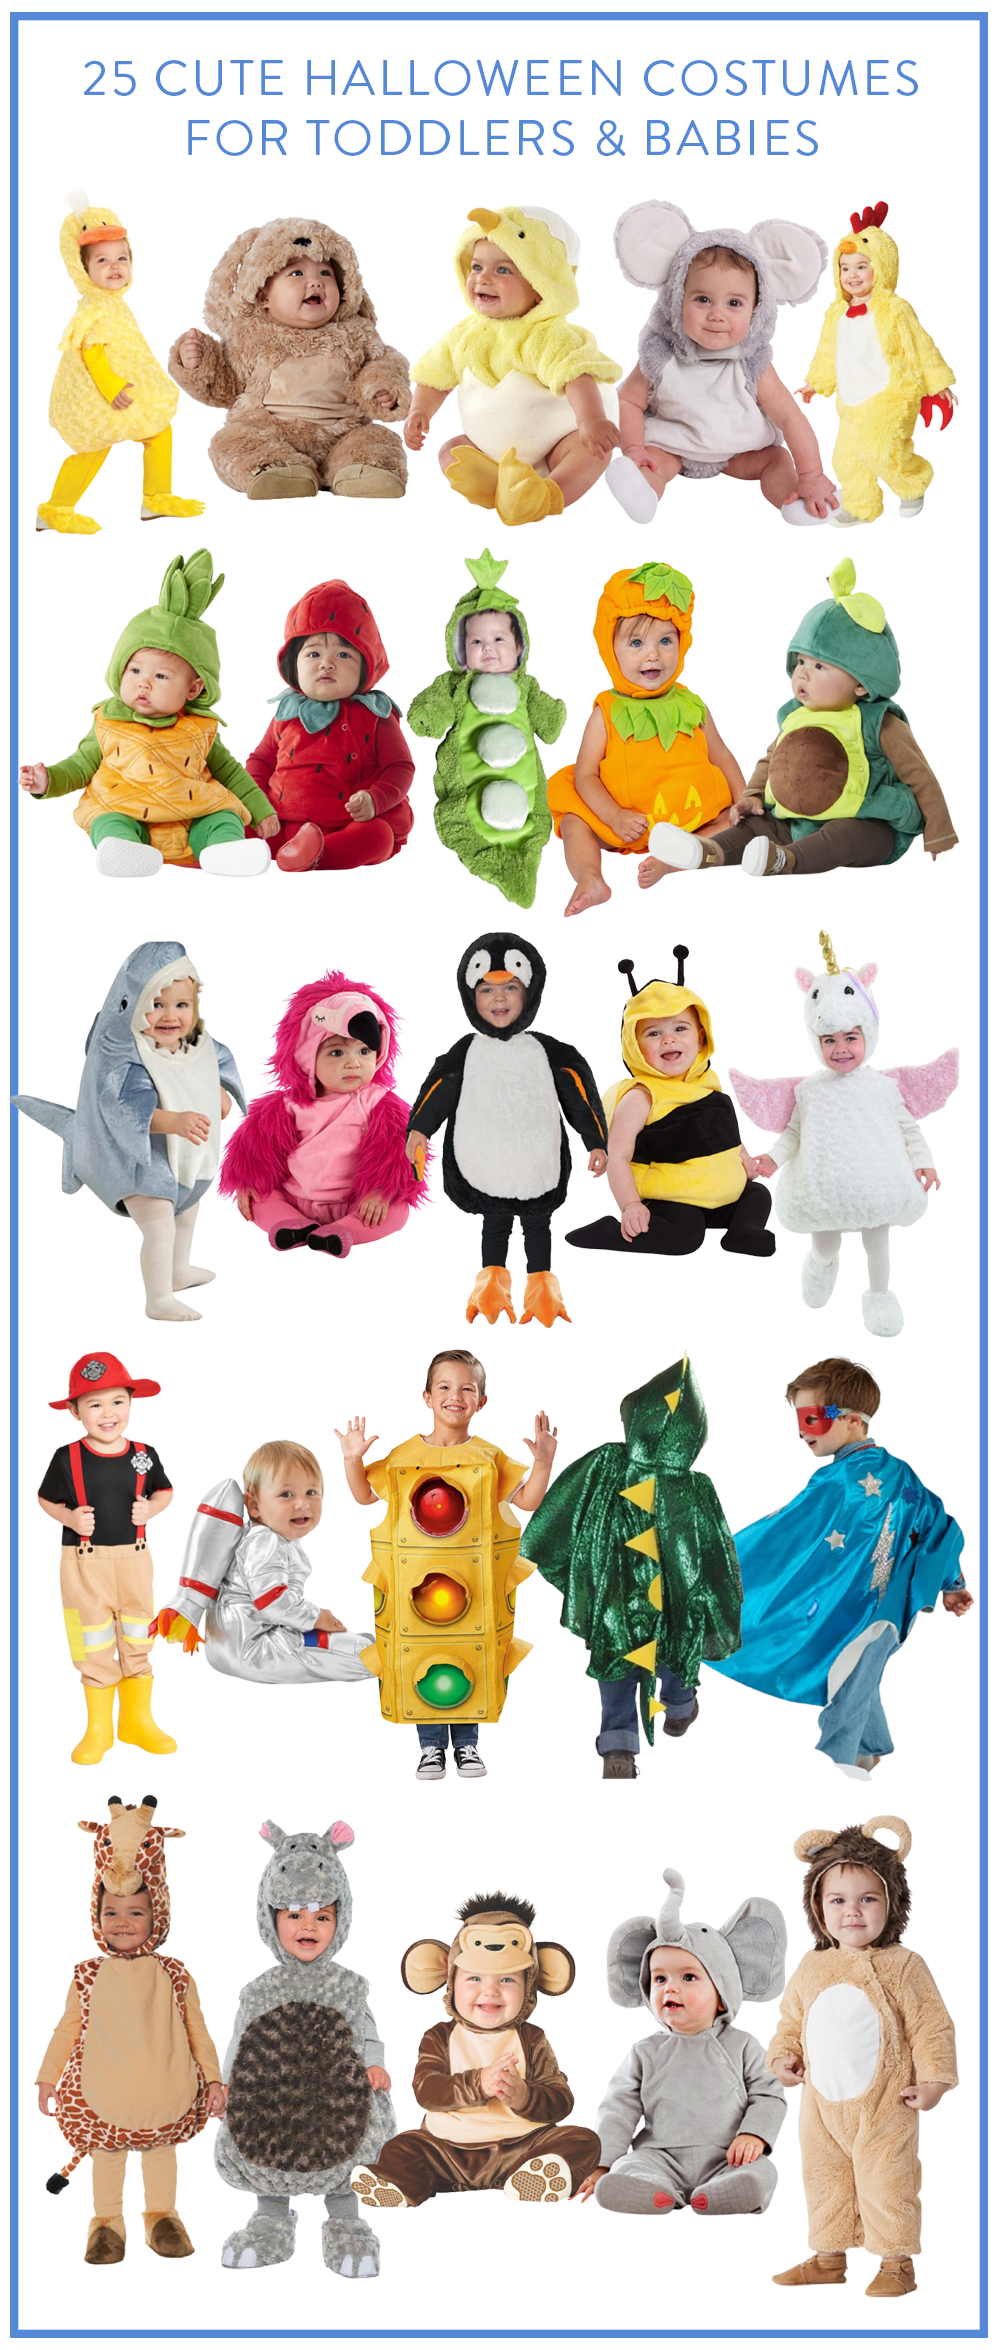 25 cute halloween costumes for toddlers and babies